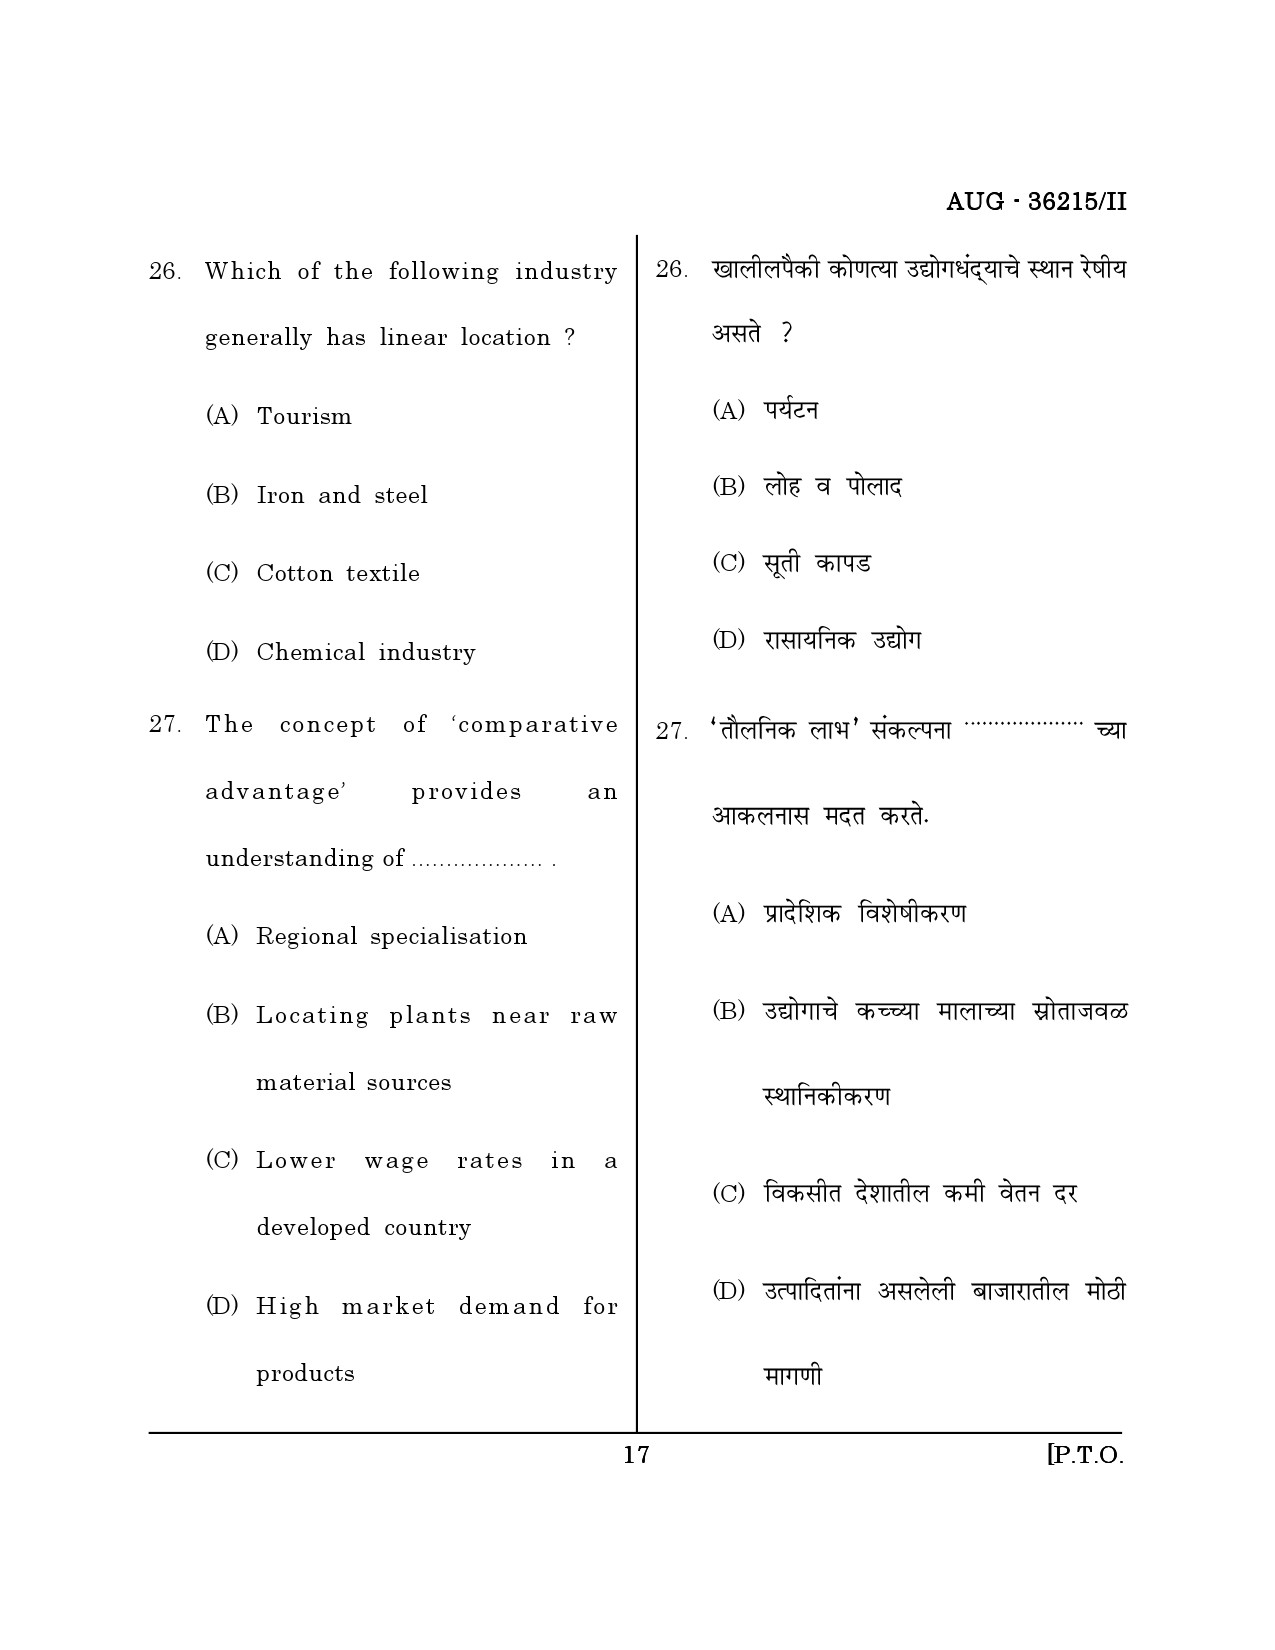 Maharashtra SET Geography Question Paper II August 2015 16